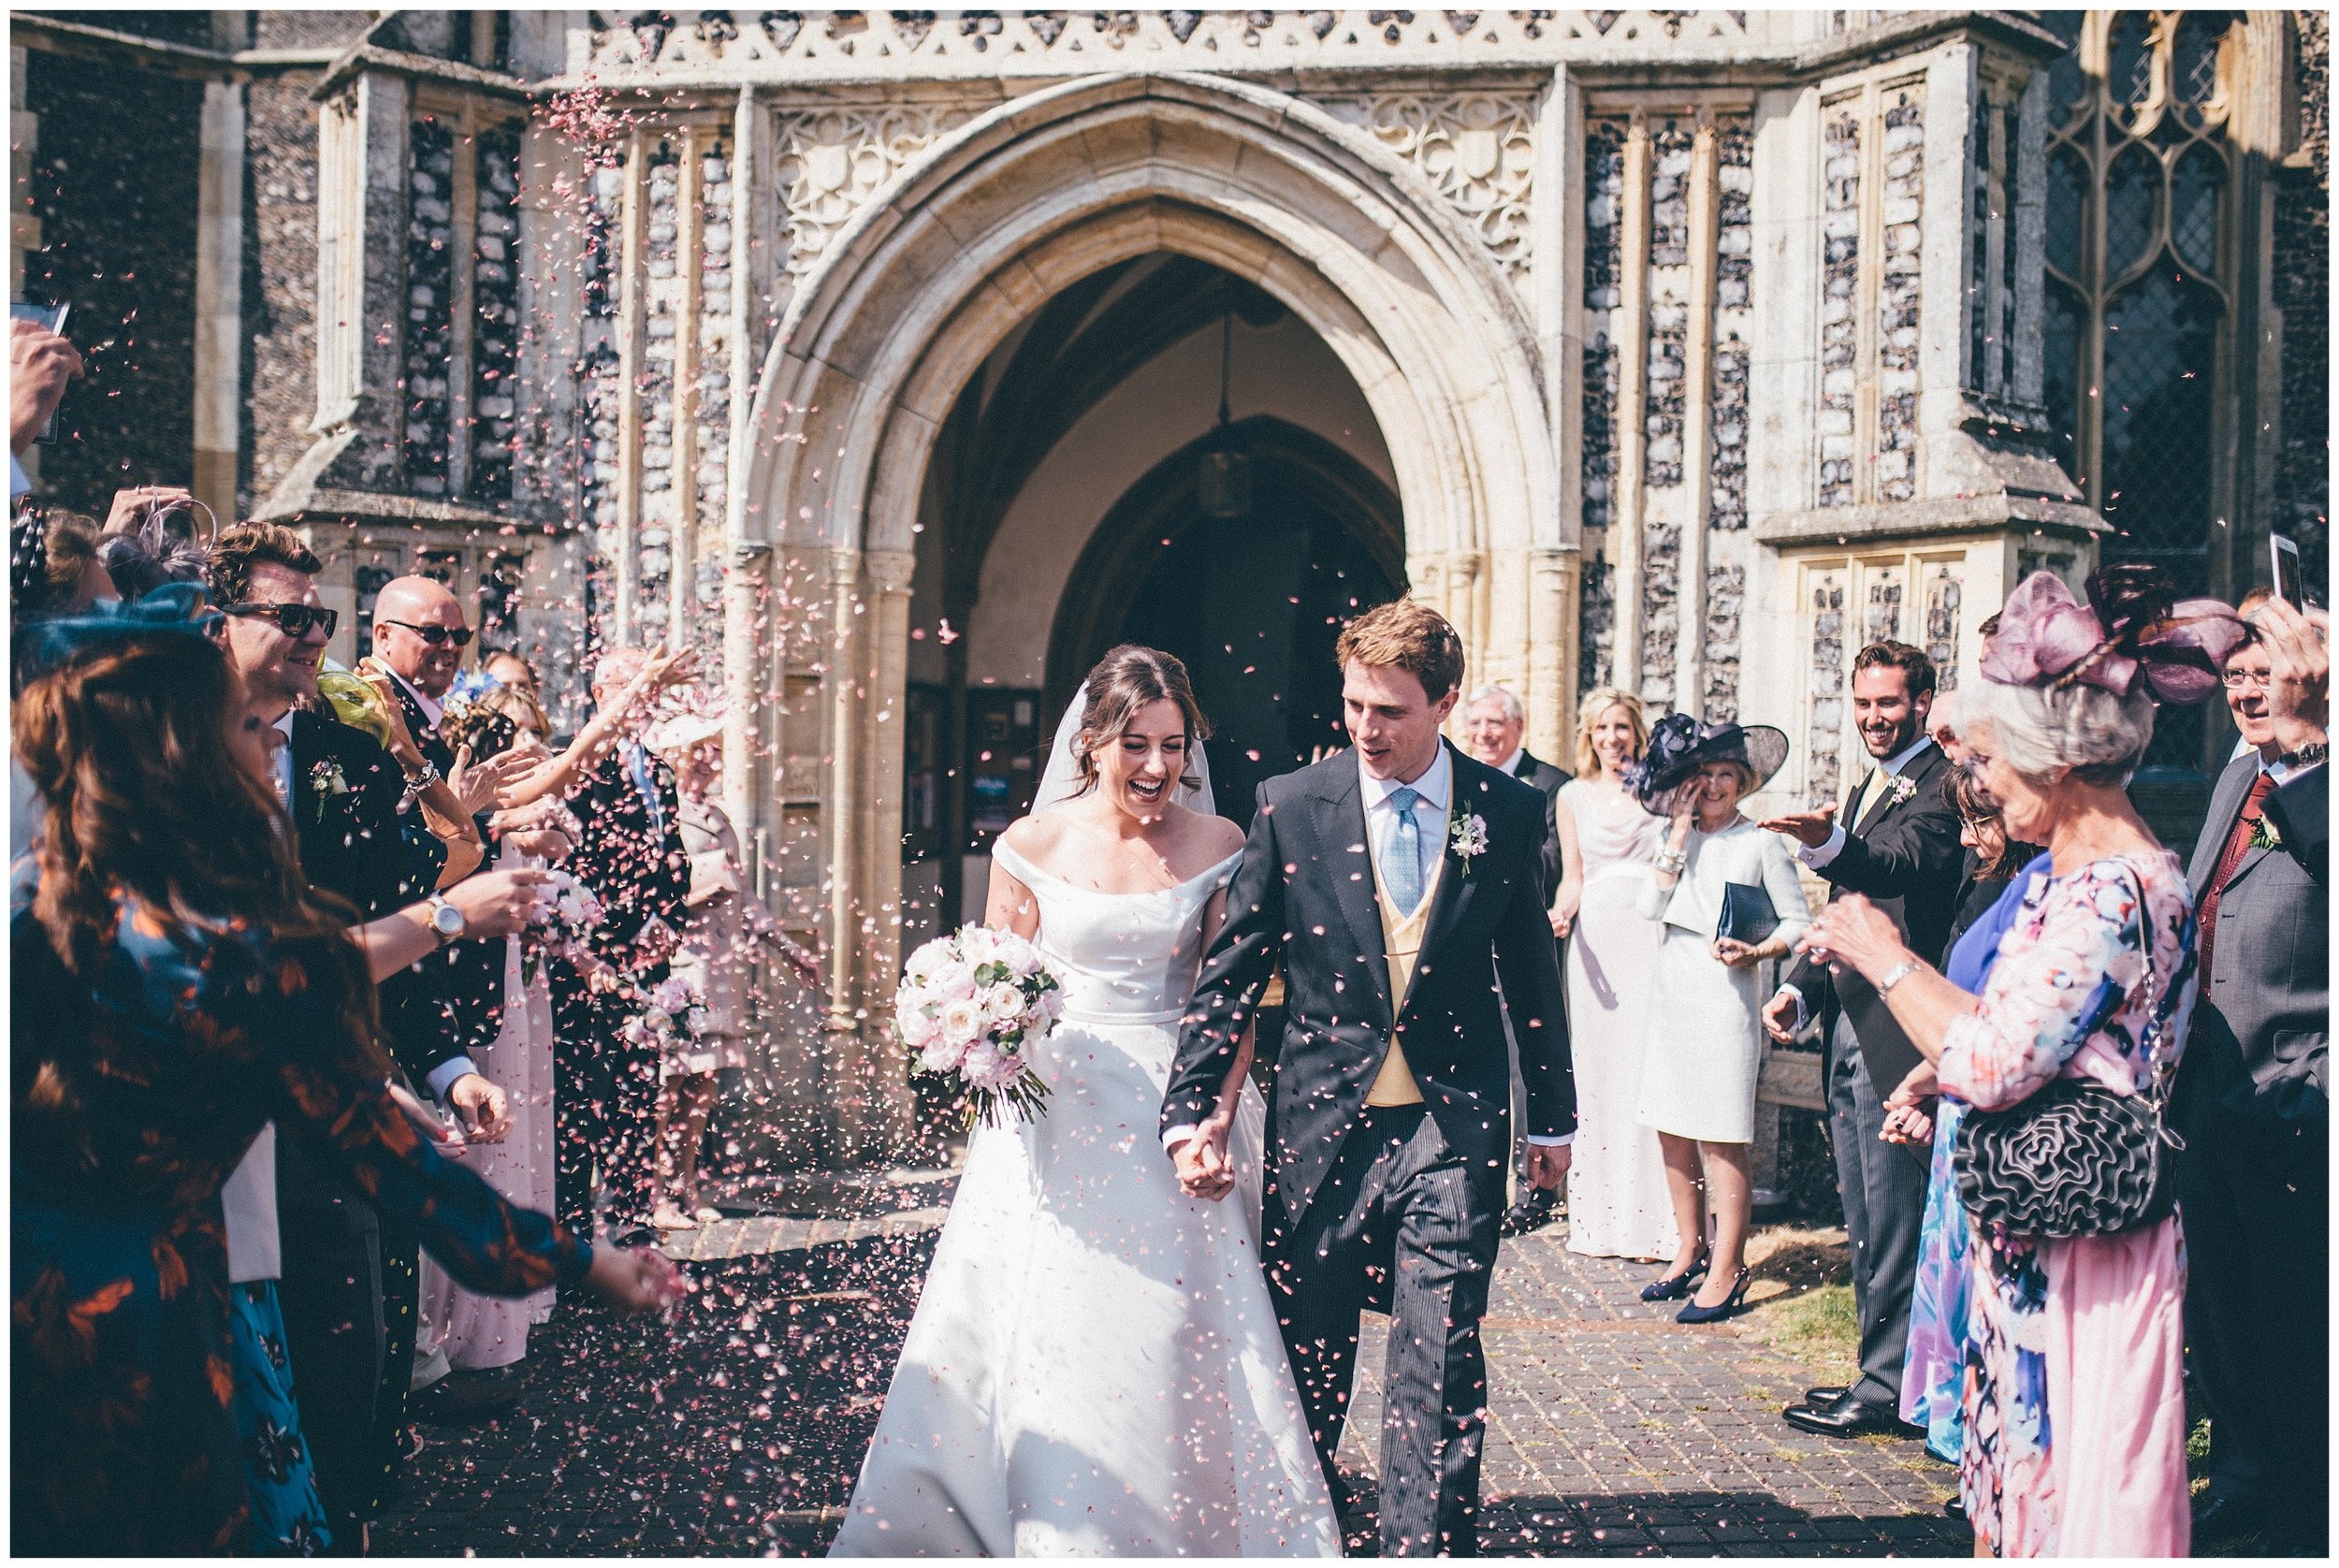 Confetti at a Wedding at St Edmunds Church in Southwold.